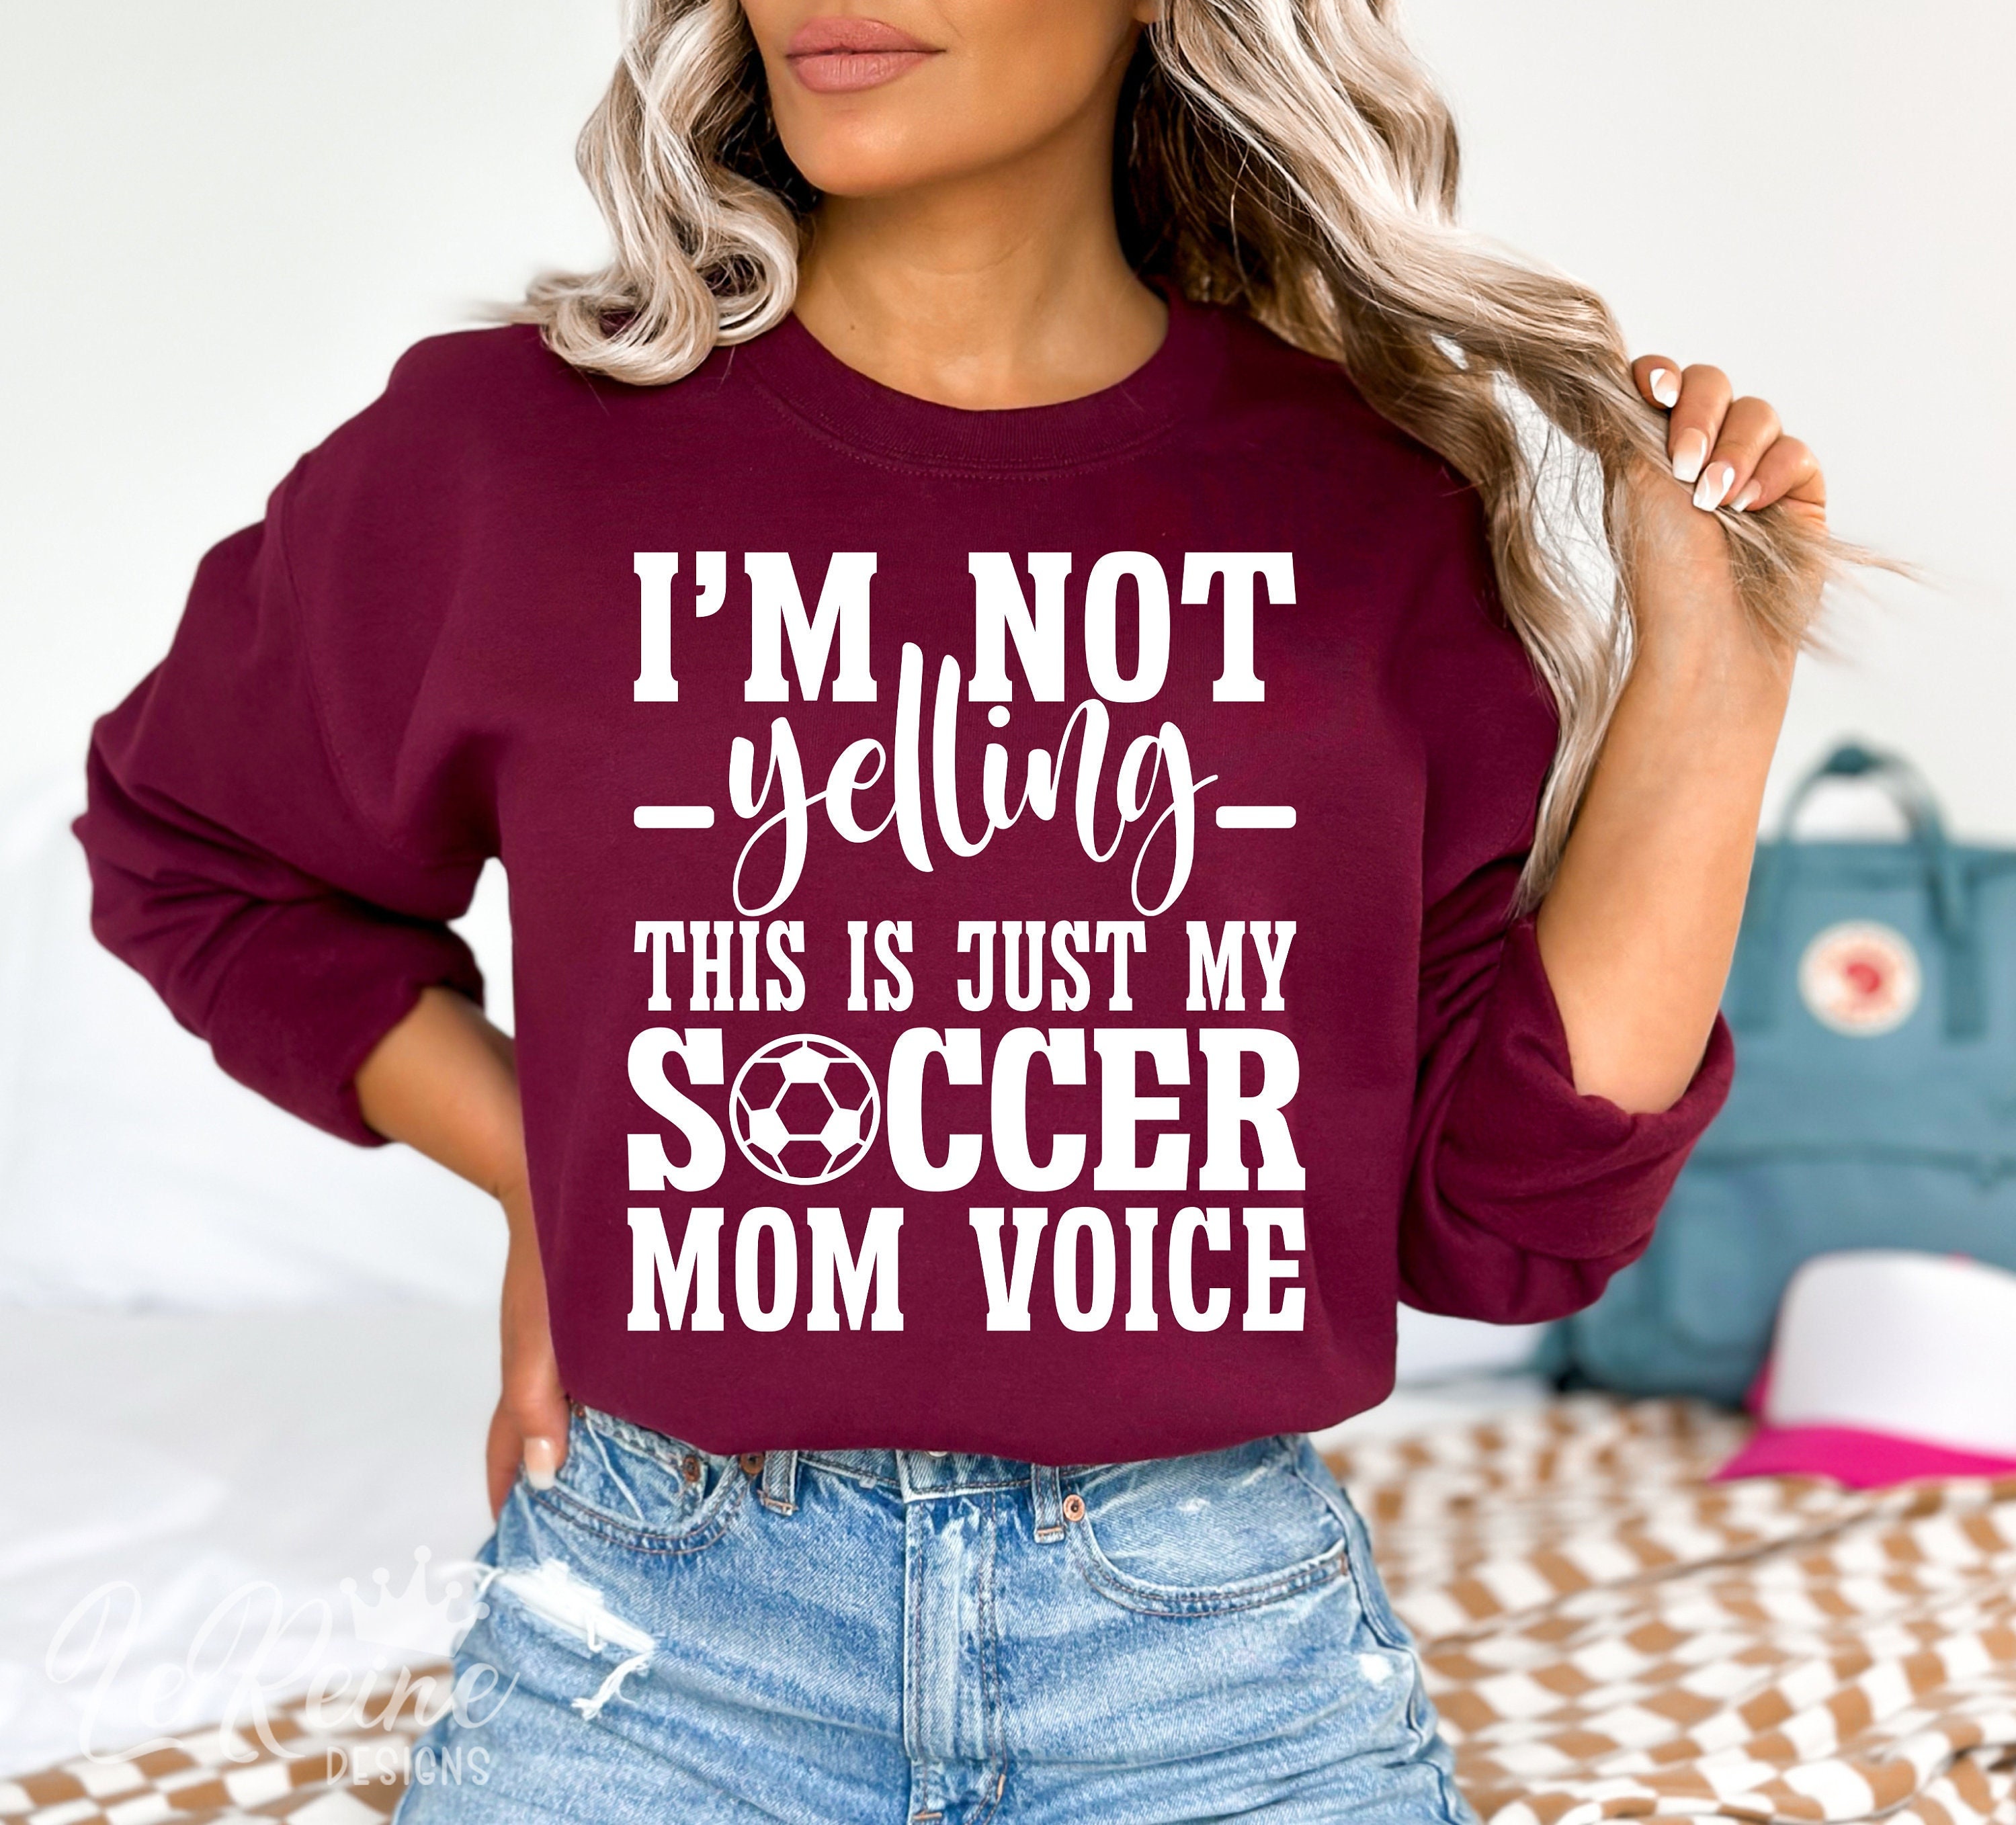 Funny Mom Tumbler I'm Not Yelling This is My Soccer Mom Voice Gift Tra –  Cute But Rude